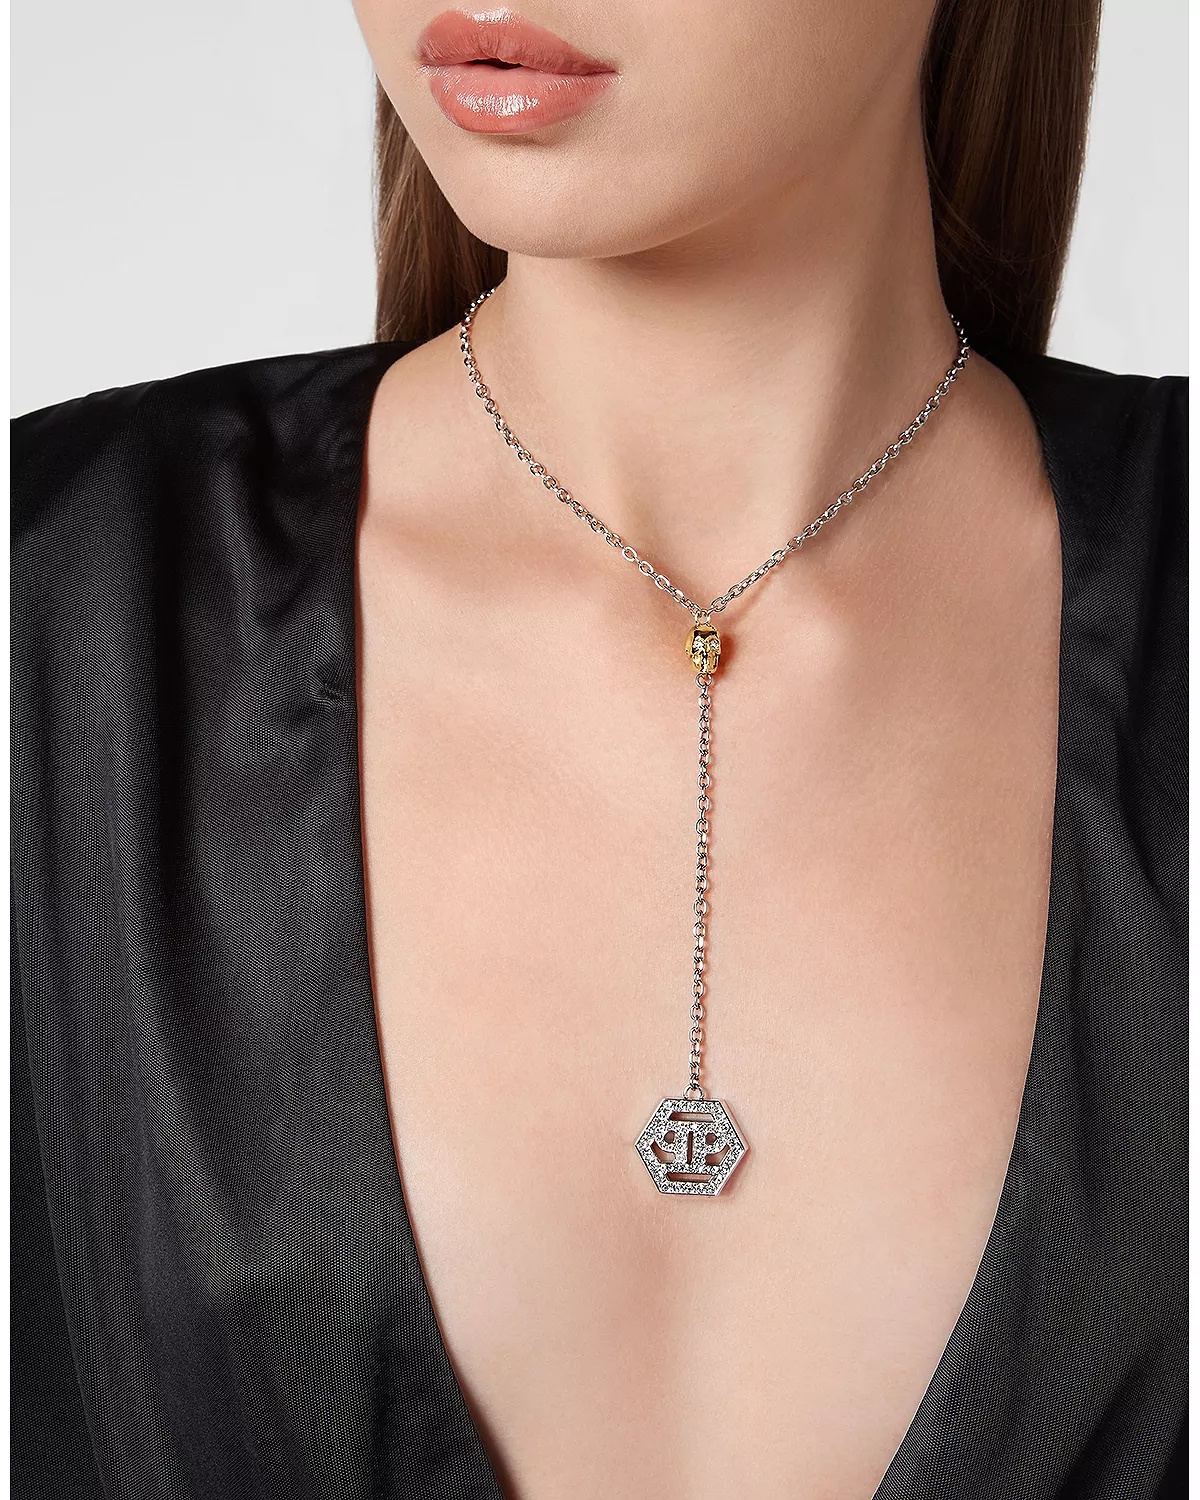 Hexagon Stainless Steel Drop Necklace, 20" - 2